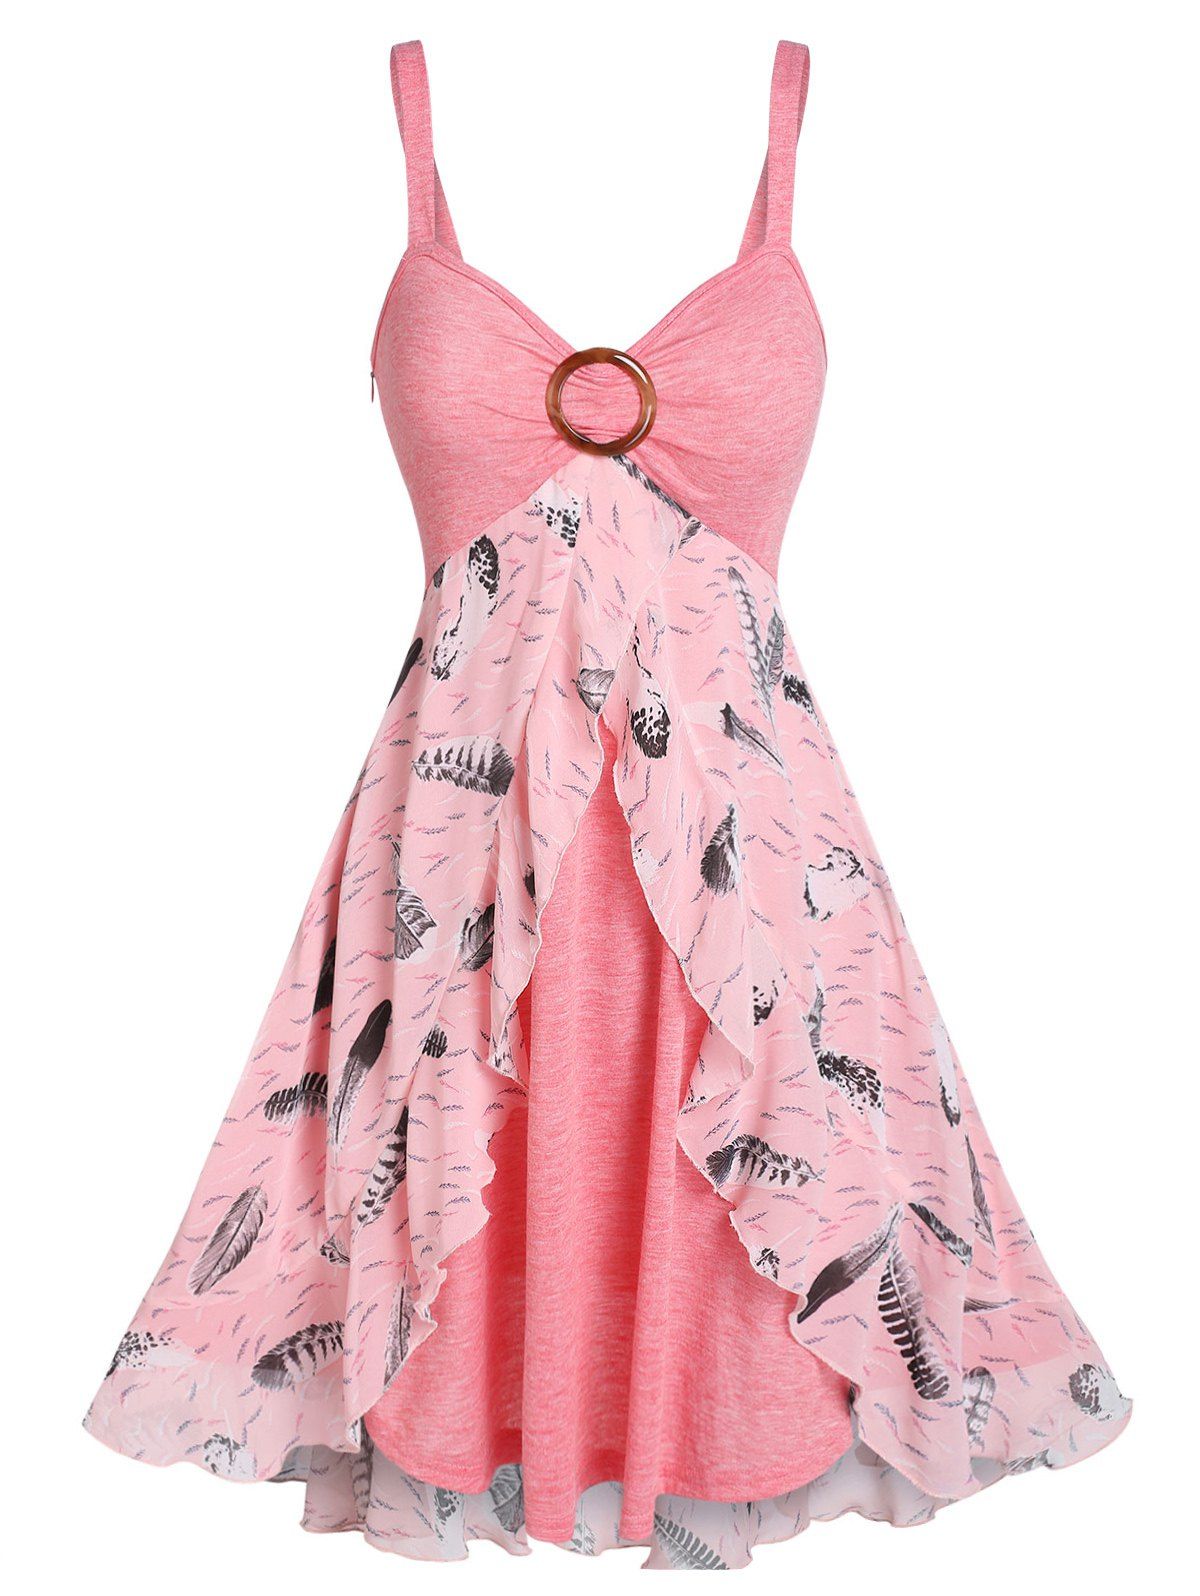 Feather Print O Ring A Line Faux Twinset Dress - LIGHT PINK L